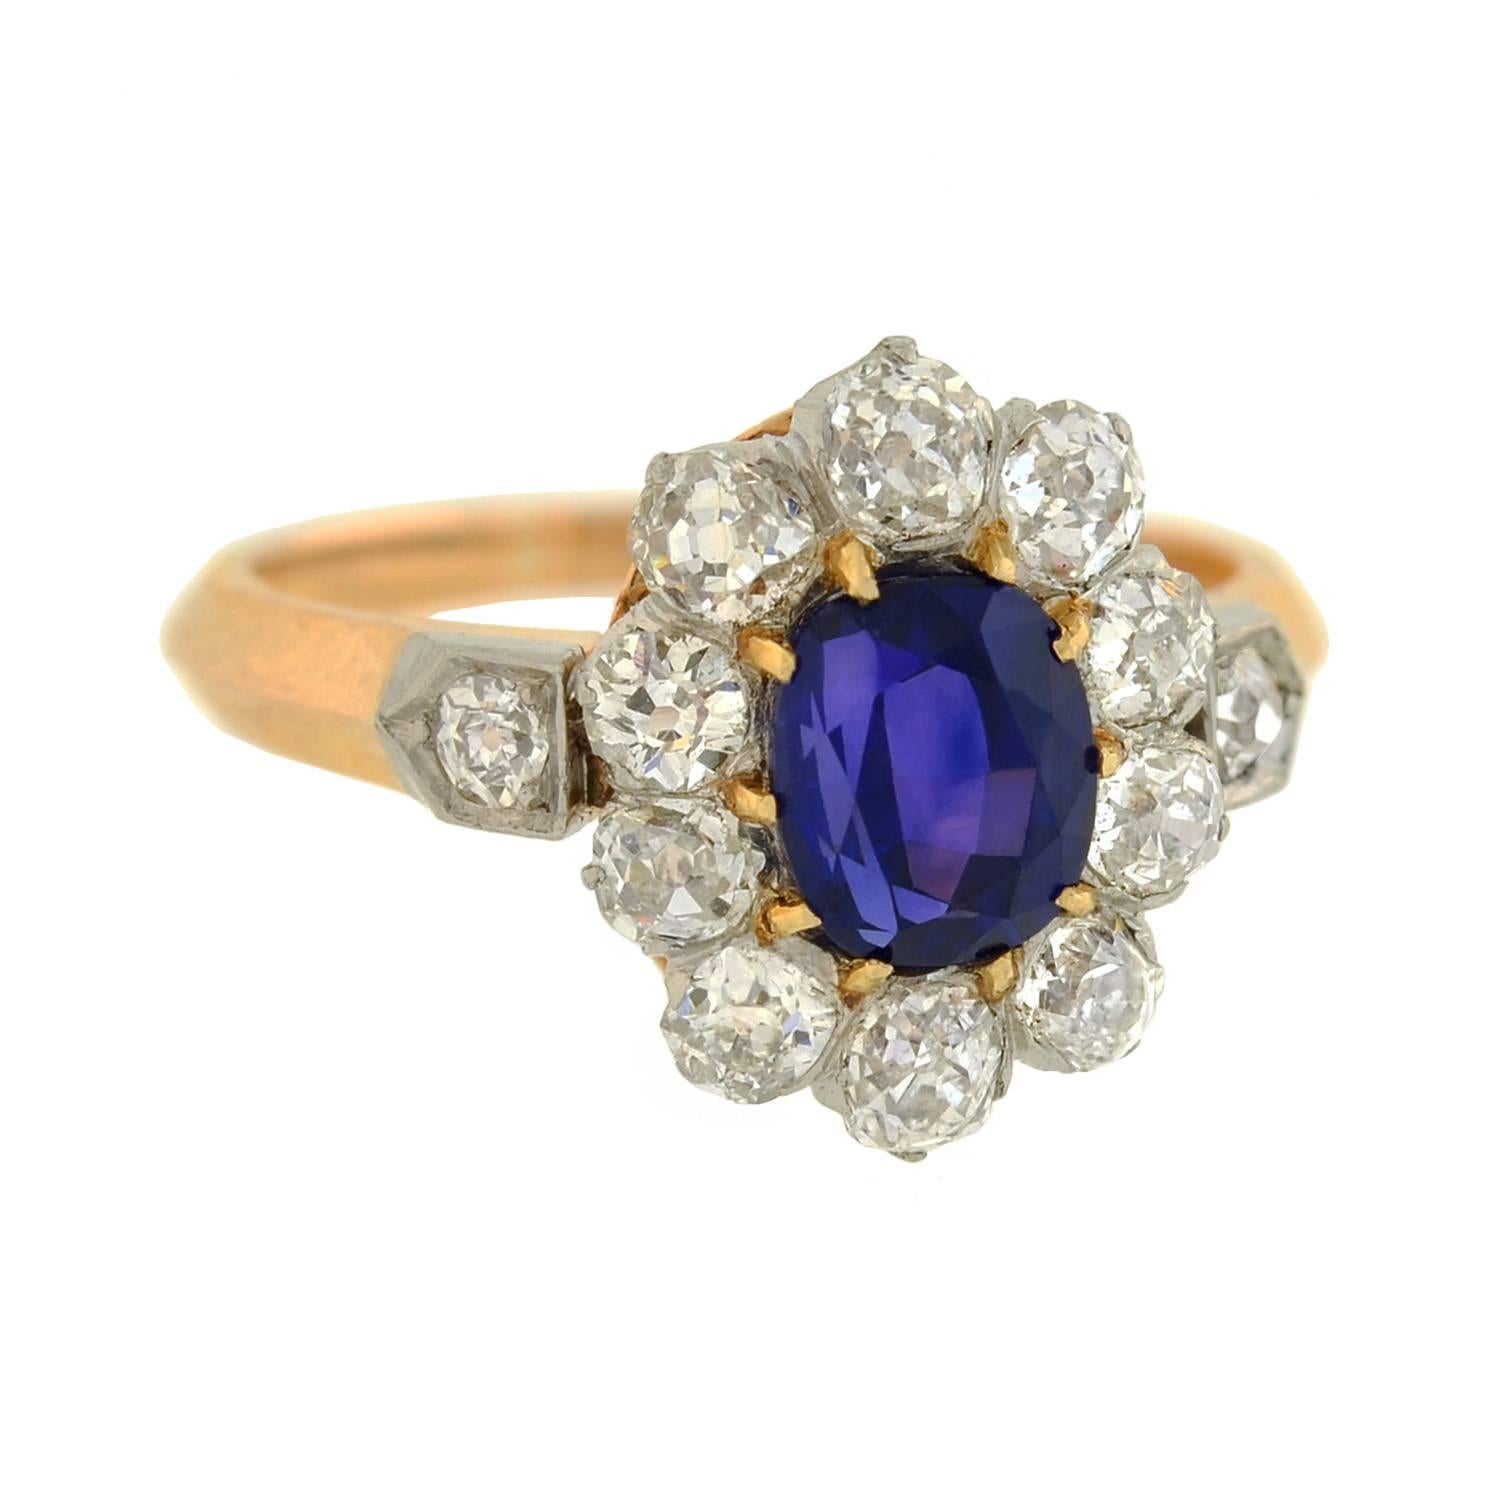 Edwardian Natural Color Changing Sapphire Diamond Ring with French Hallmarks